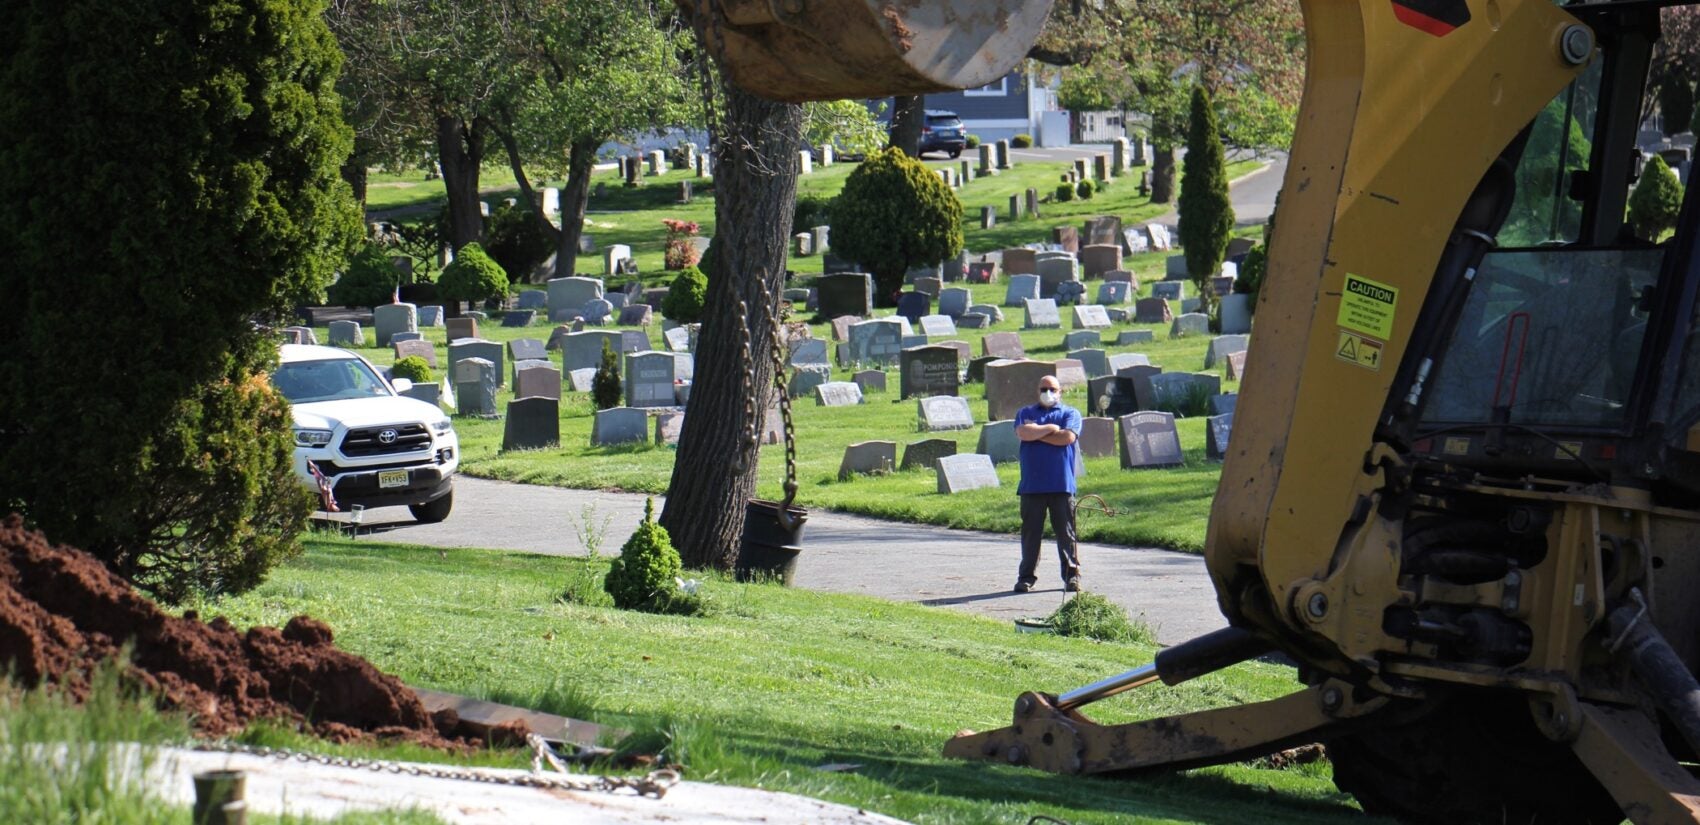 Jeff Dodgson, who oversees the grounds crew at Glendale Cemetery in Bloomfield, N.J., watches as a grave is prepared. (Emma Lee/WHYY)